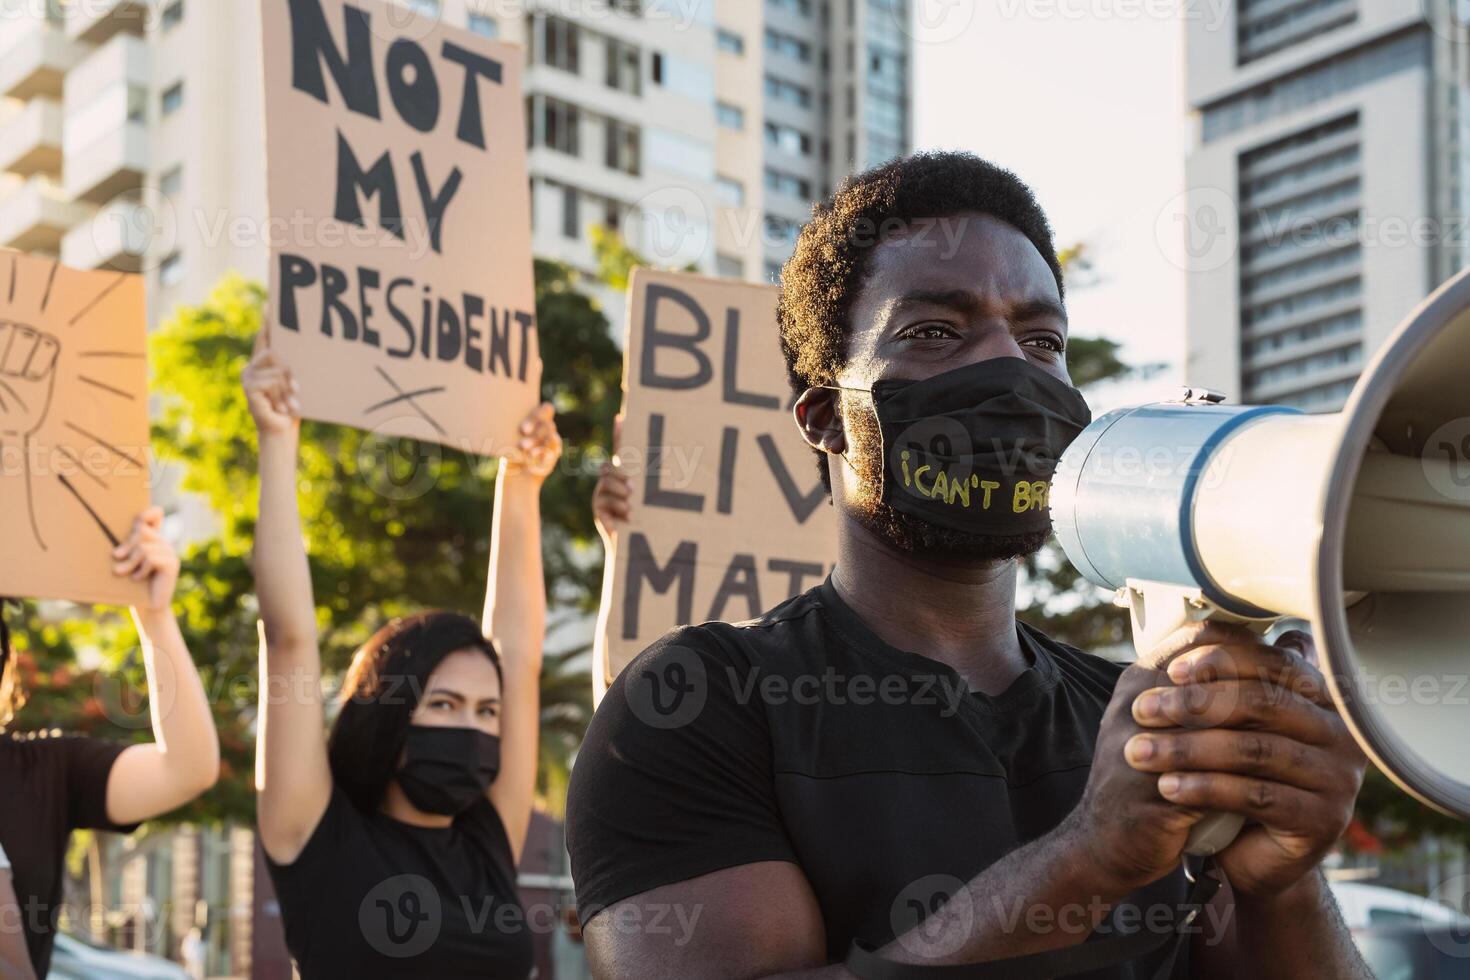 Activist movement protesting against racism and fighting for equality - Demonstrators from different cultures and race protest on street for equal rights - Black lives matter protests city concept photo